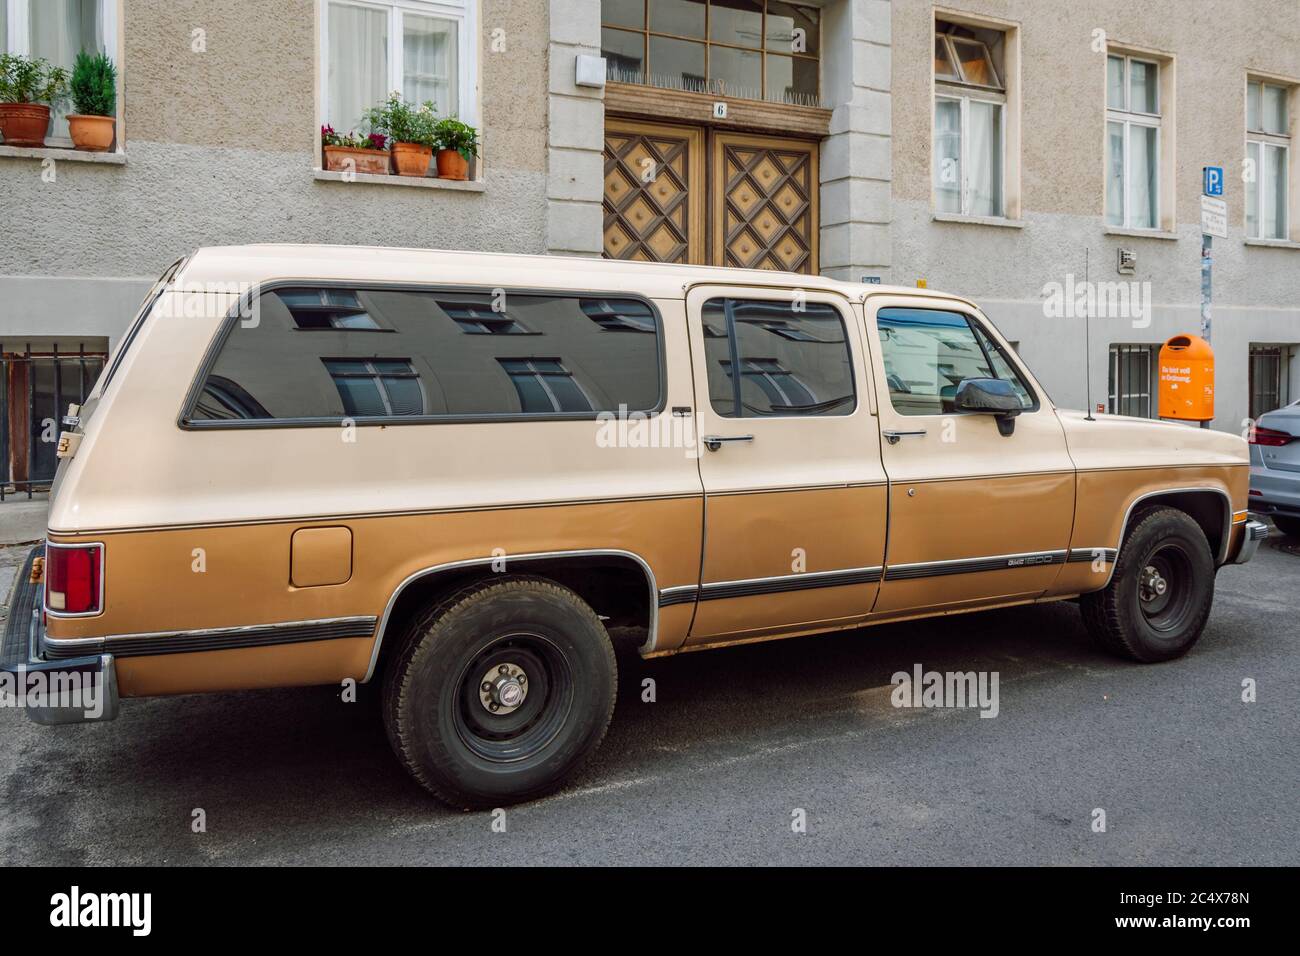 GMC Suburban Seventh generation. Classic American full-size SUV. It is traditionally one of General Motors' most profitable vehicles. Stock Photo